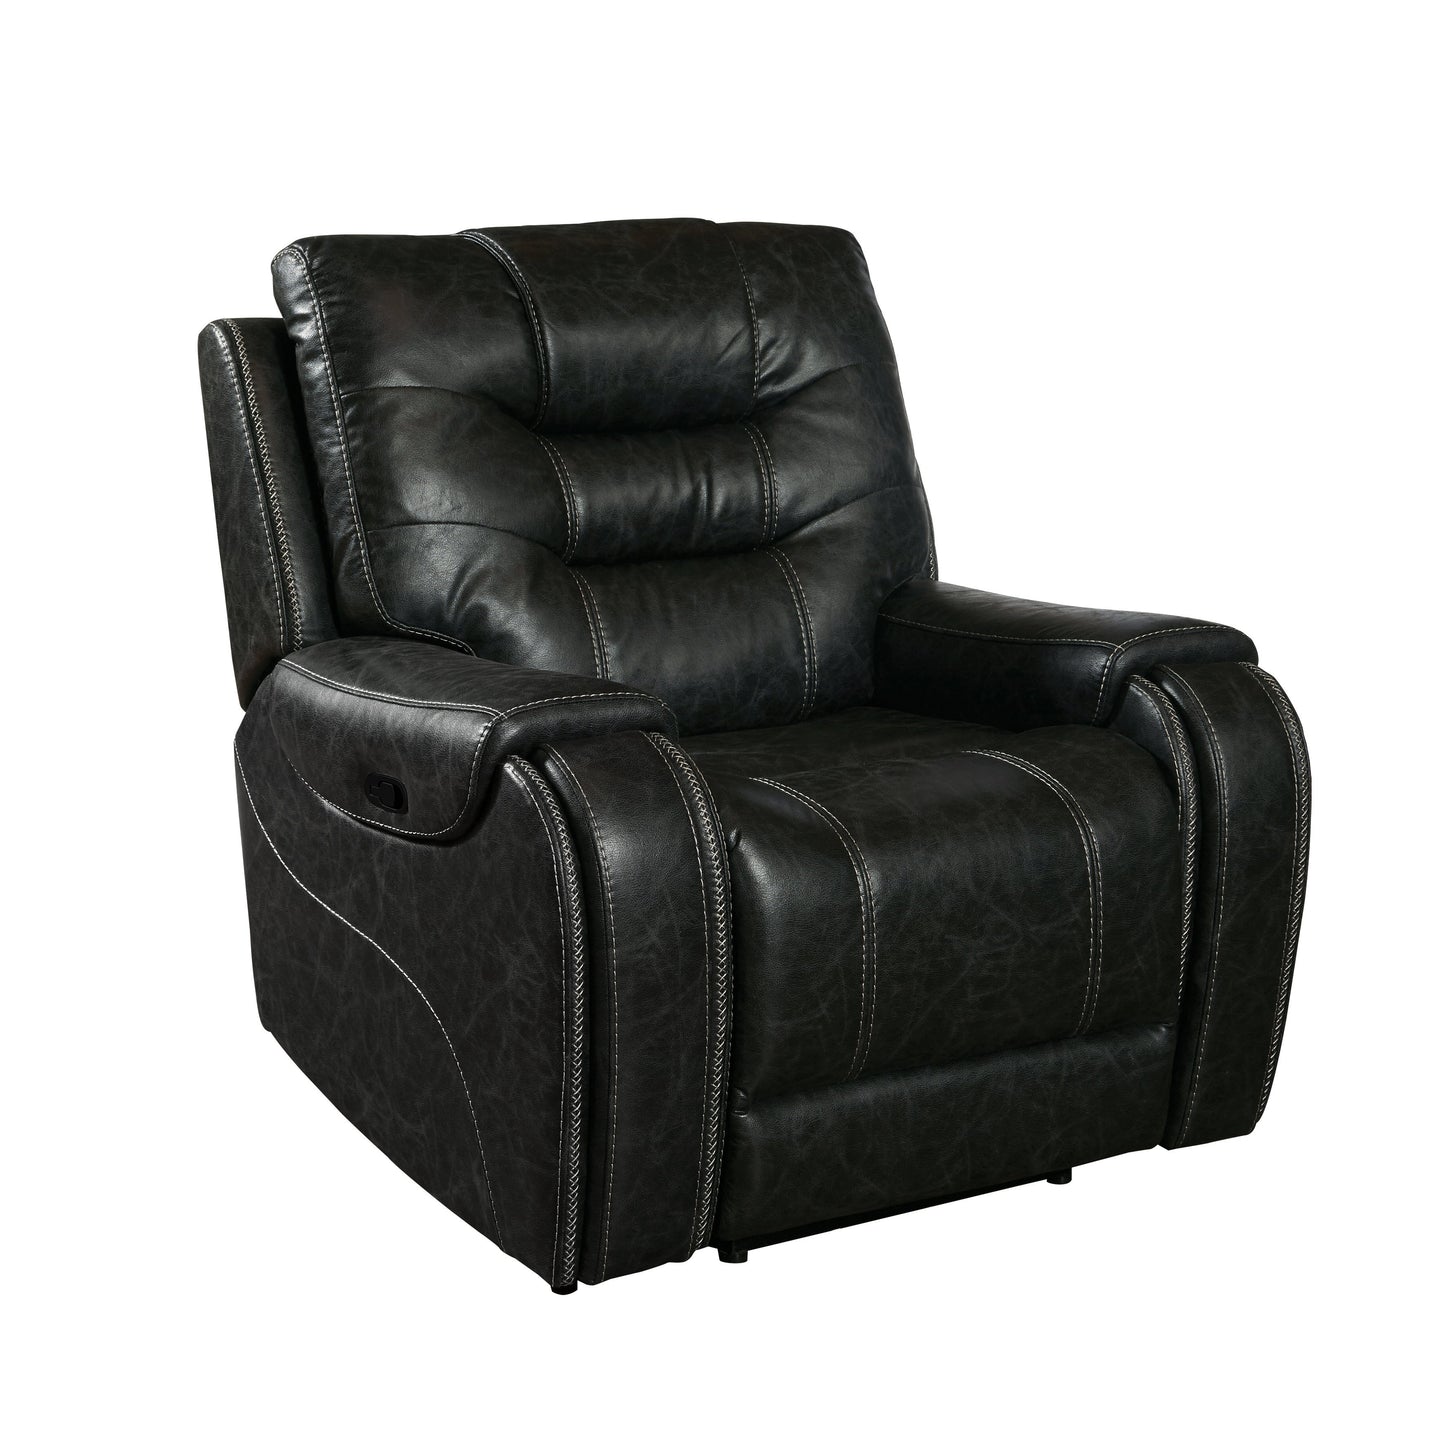 Rowena Contemporary Faux Leather Recliner with Cup Holder, Smoke